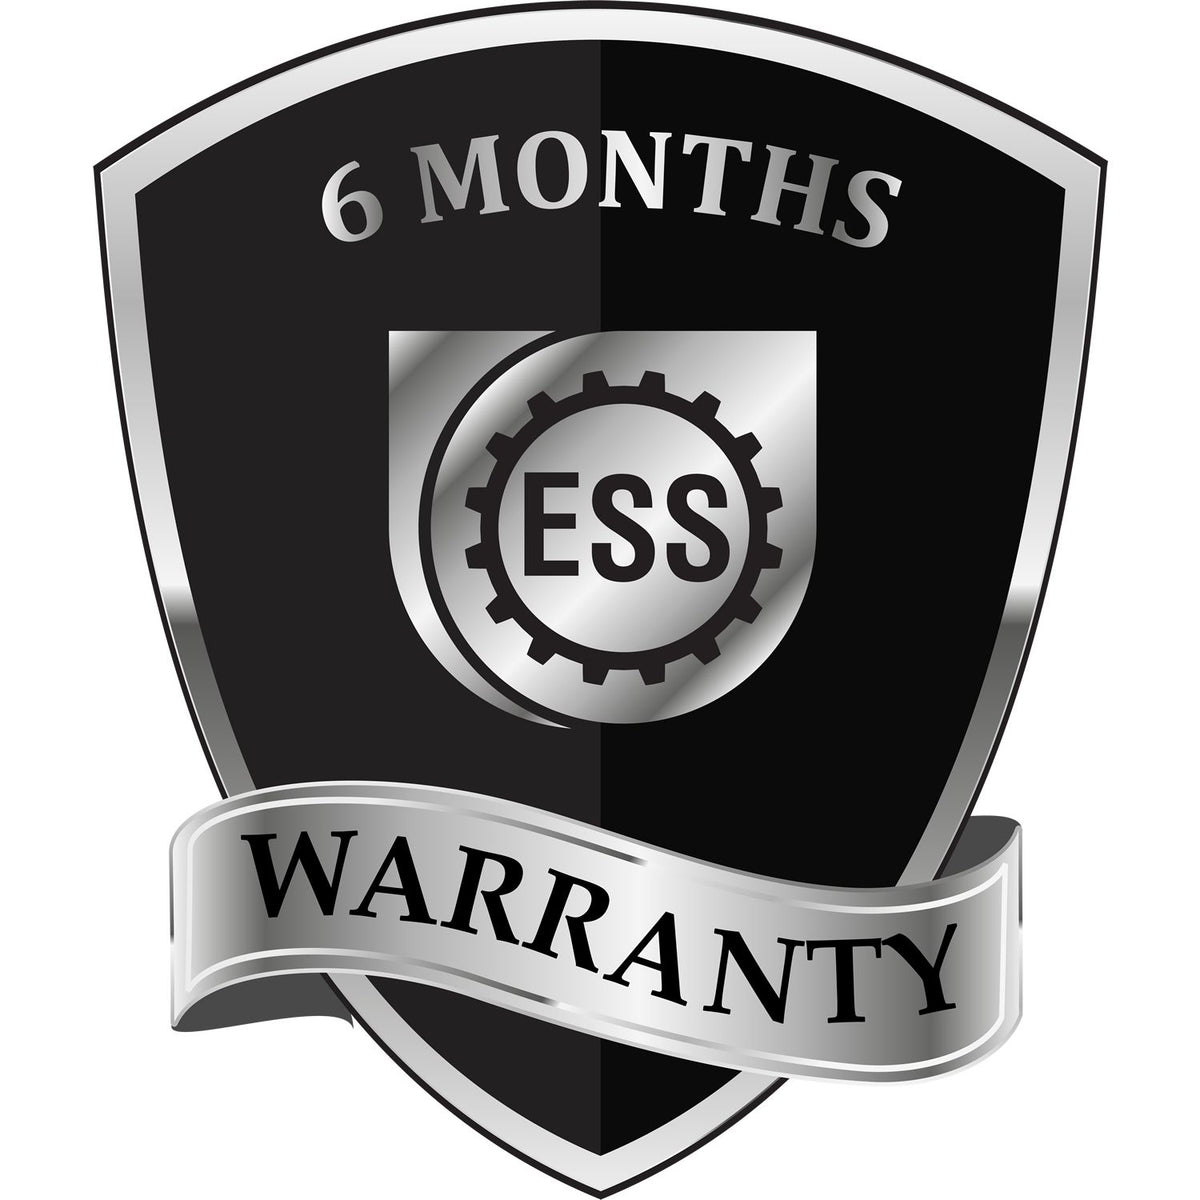 A badge or emblem showing a warranty icon for the Missouri Professional Engineer Seal Stamp